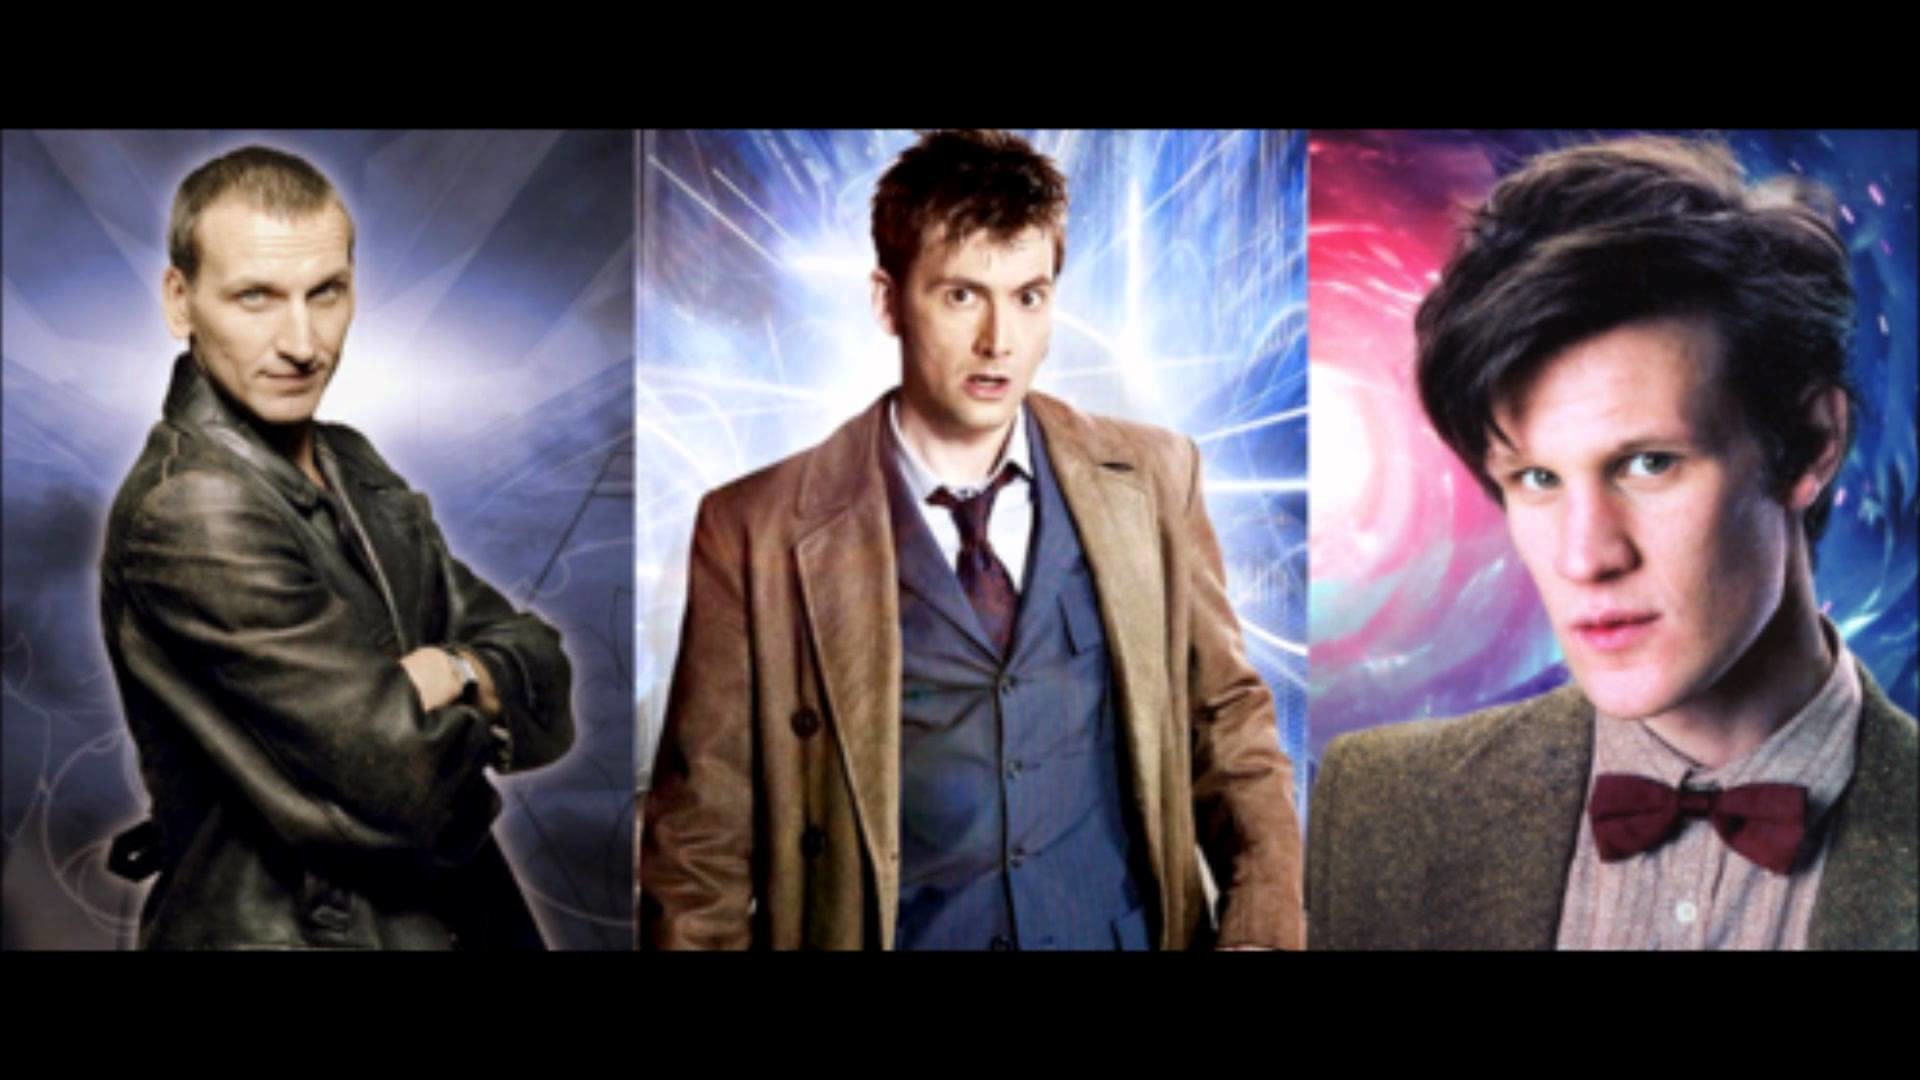 1920x1080 Christopher Eccleston as the Ninth Doctor, David Tennant as the Tenth Doctor,  and Matt